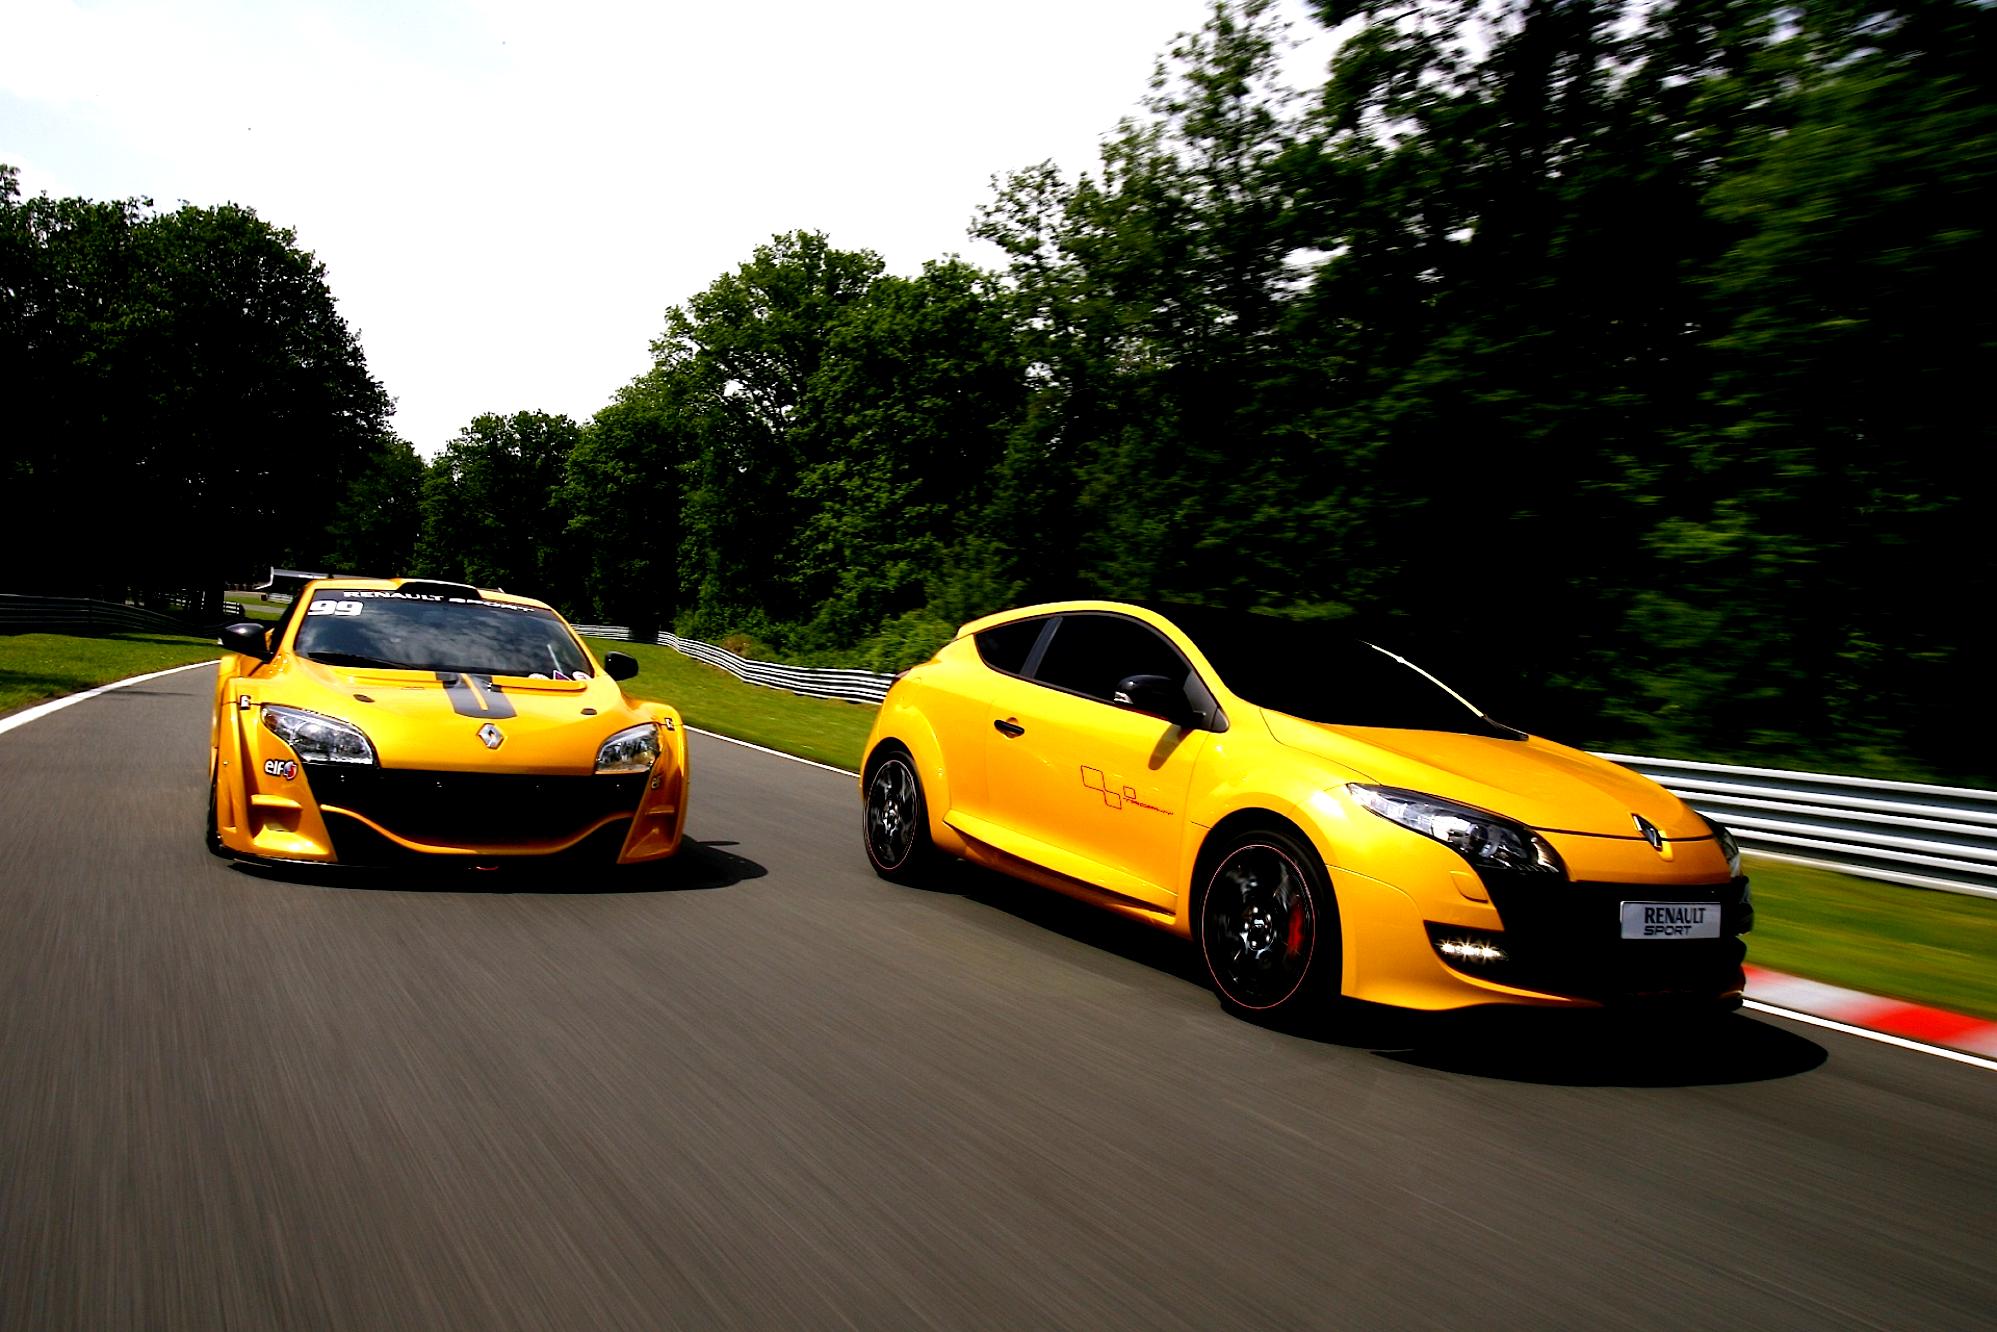 Renault Megane RS Coupe 2009 #42